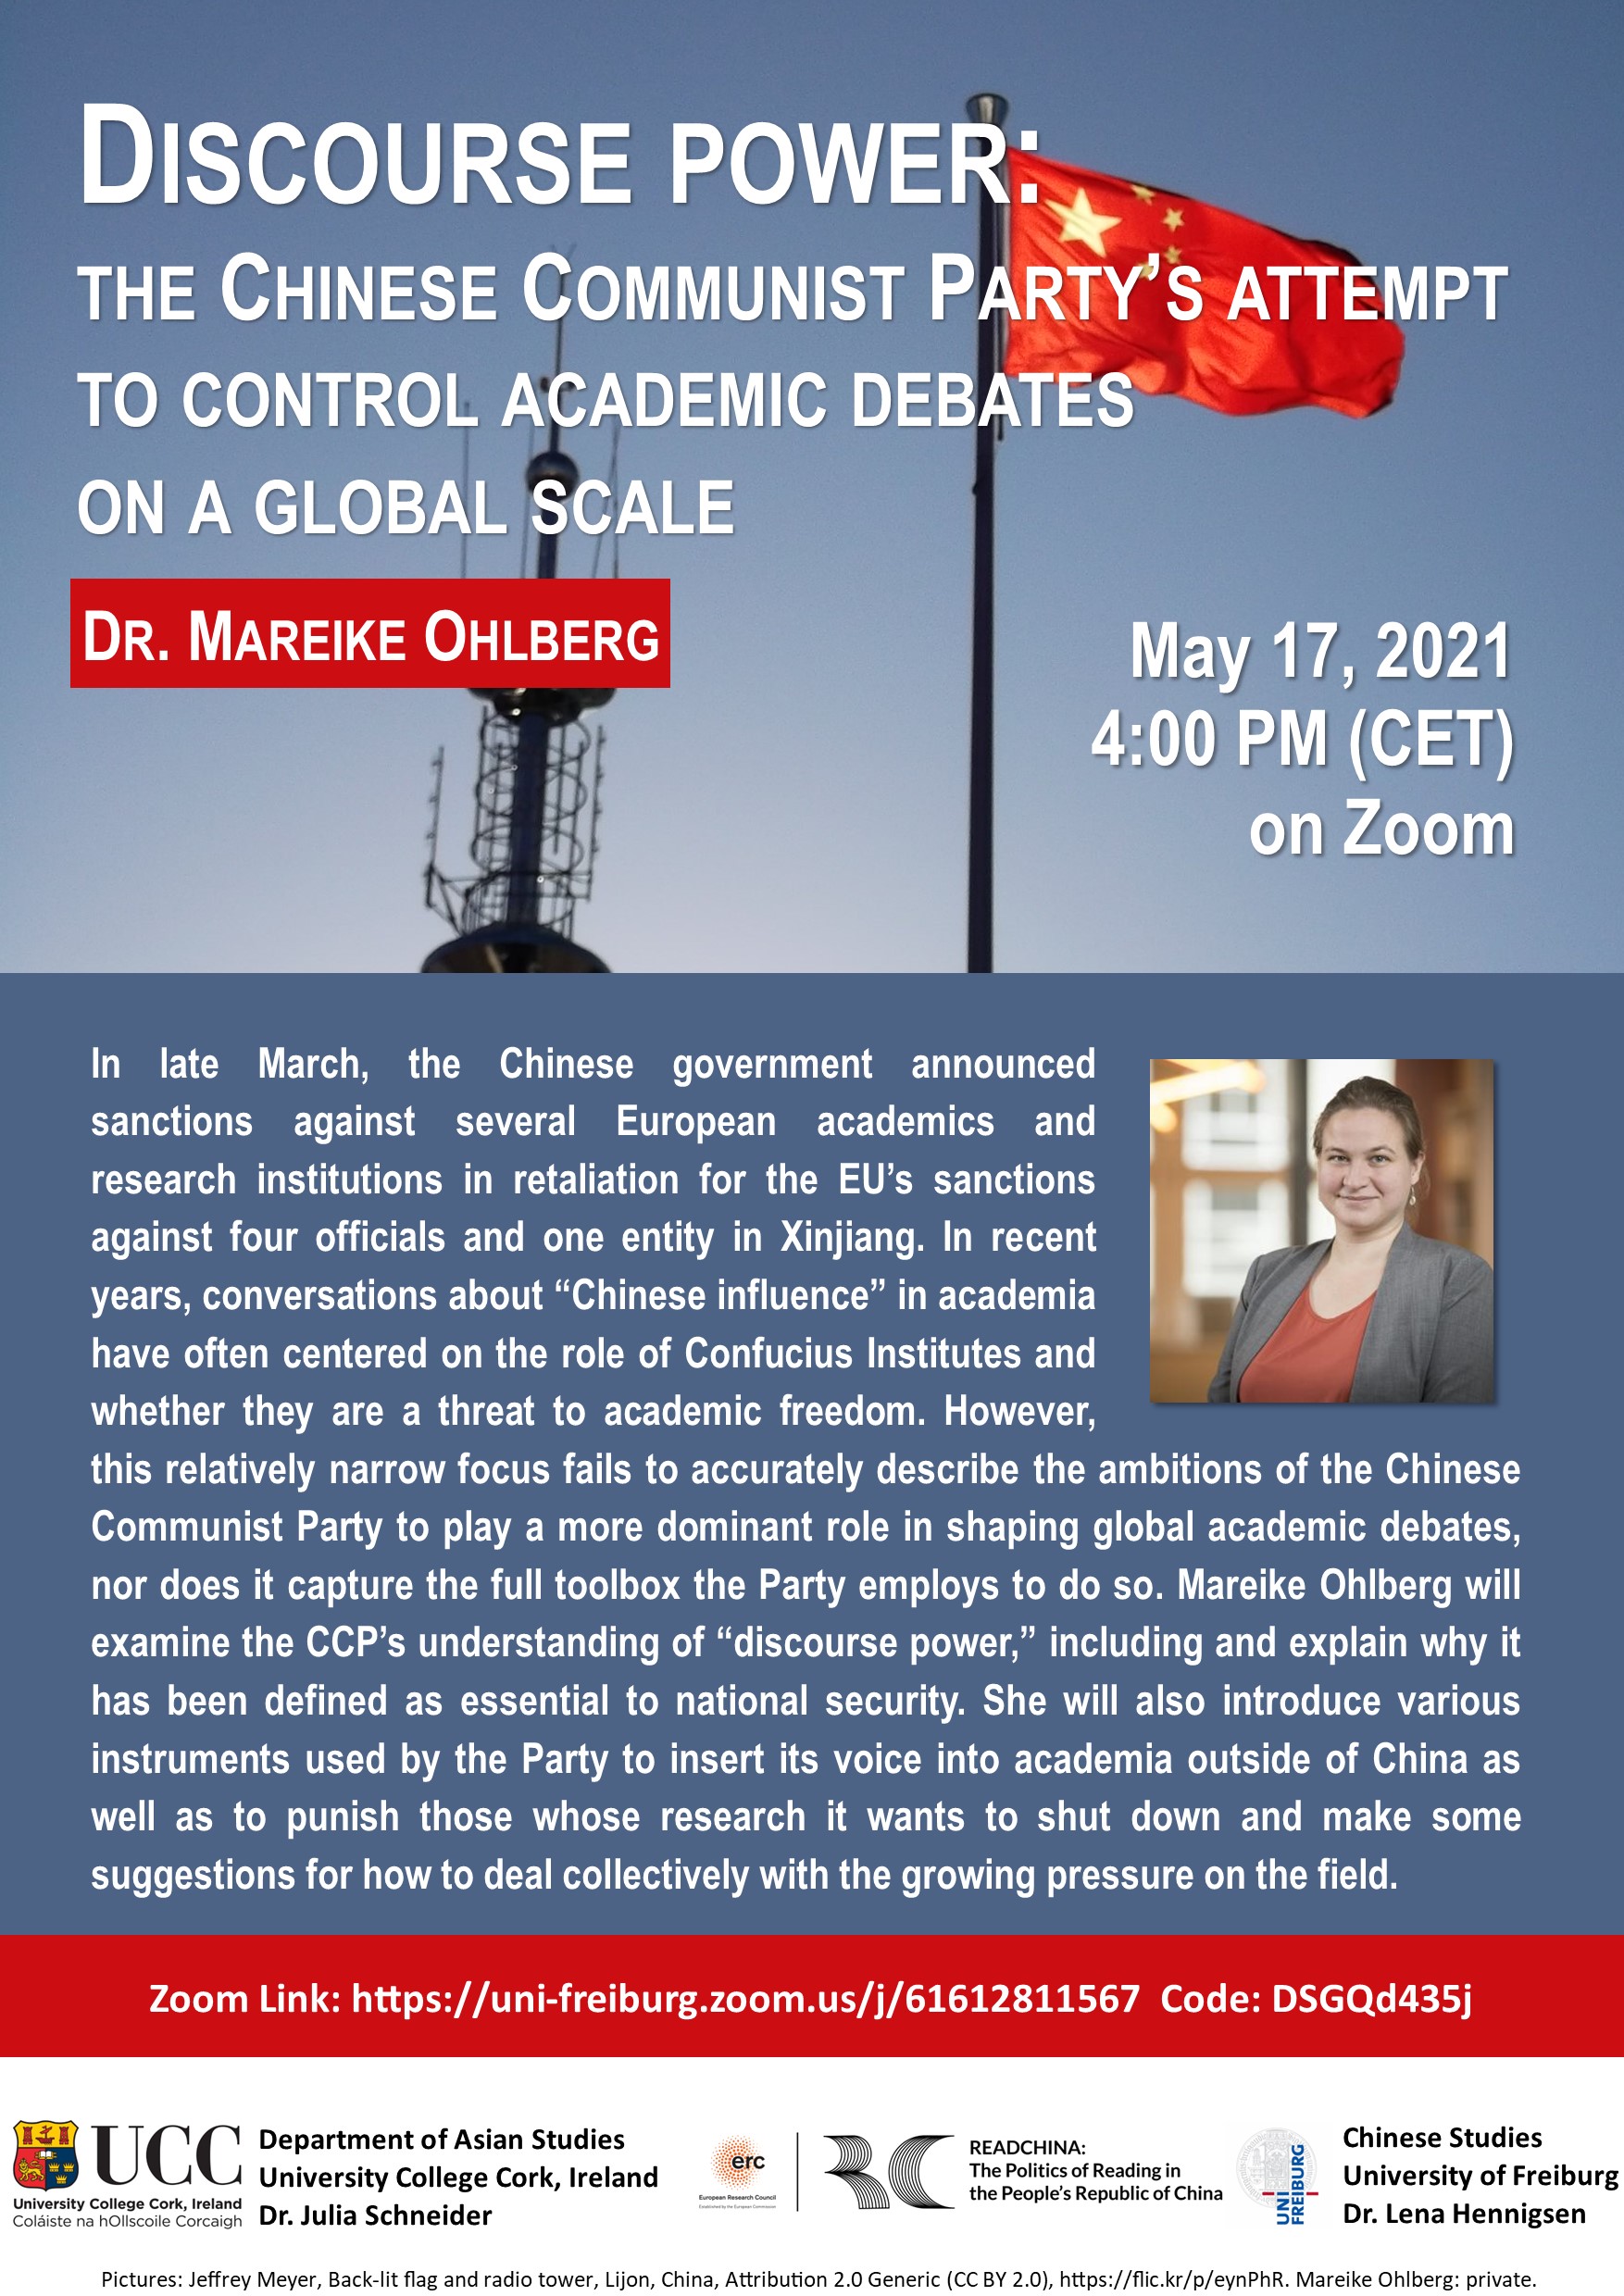 Guest Lecture: Discourse Power: The Chinese Communist Party’s Attempt to Control Academic Debates on a Global Scale